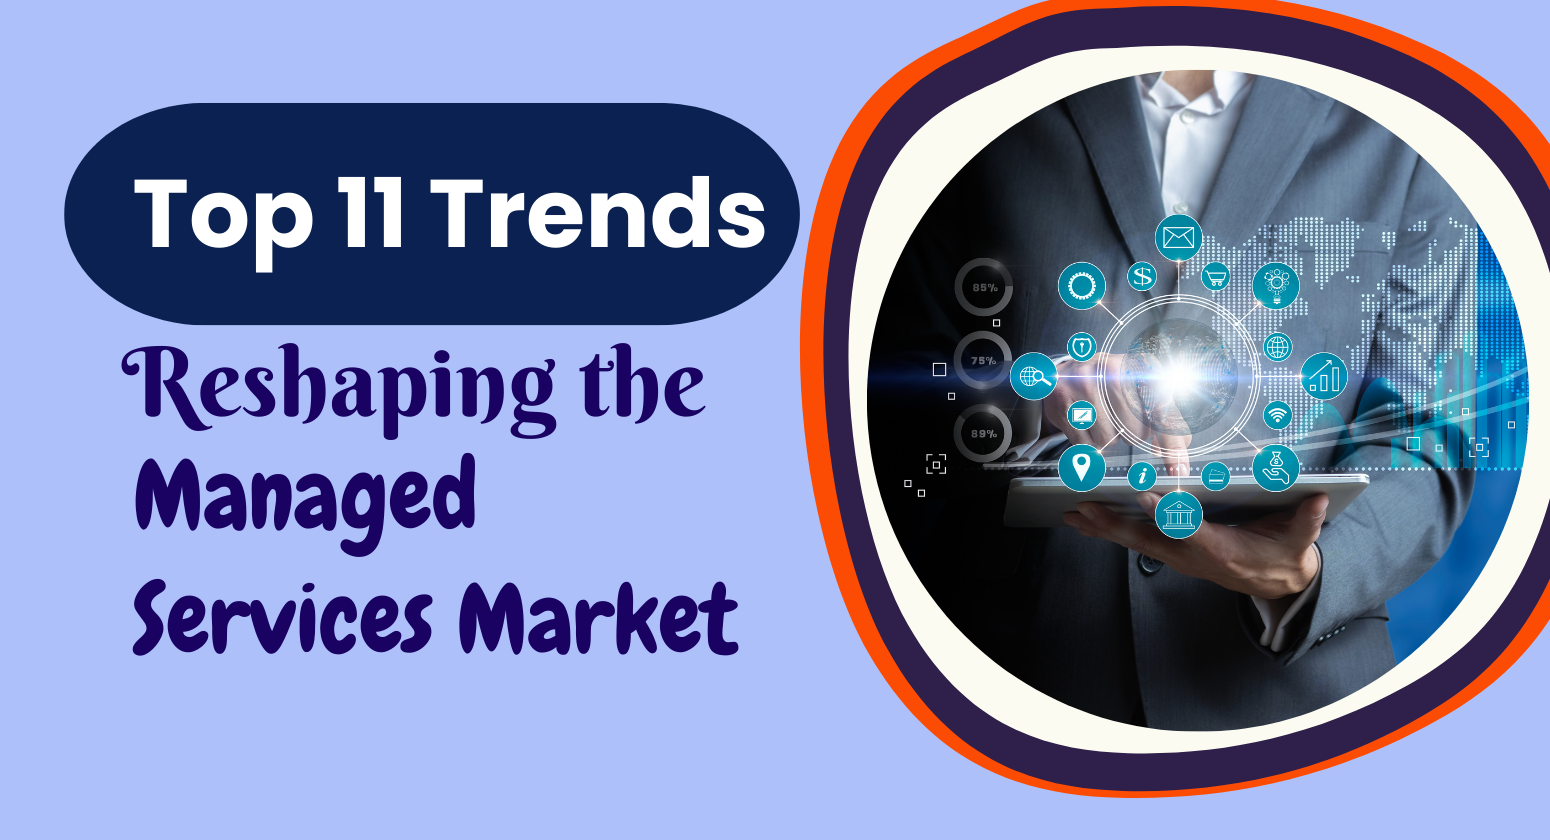 Top 11 Trends Reshaping the Managed Services Market